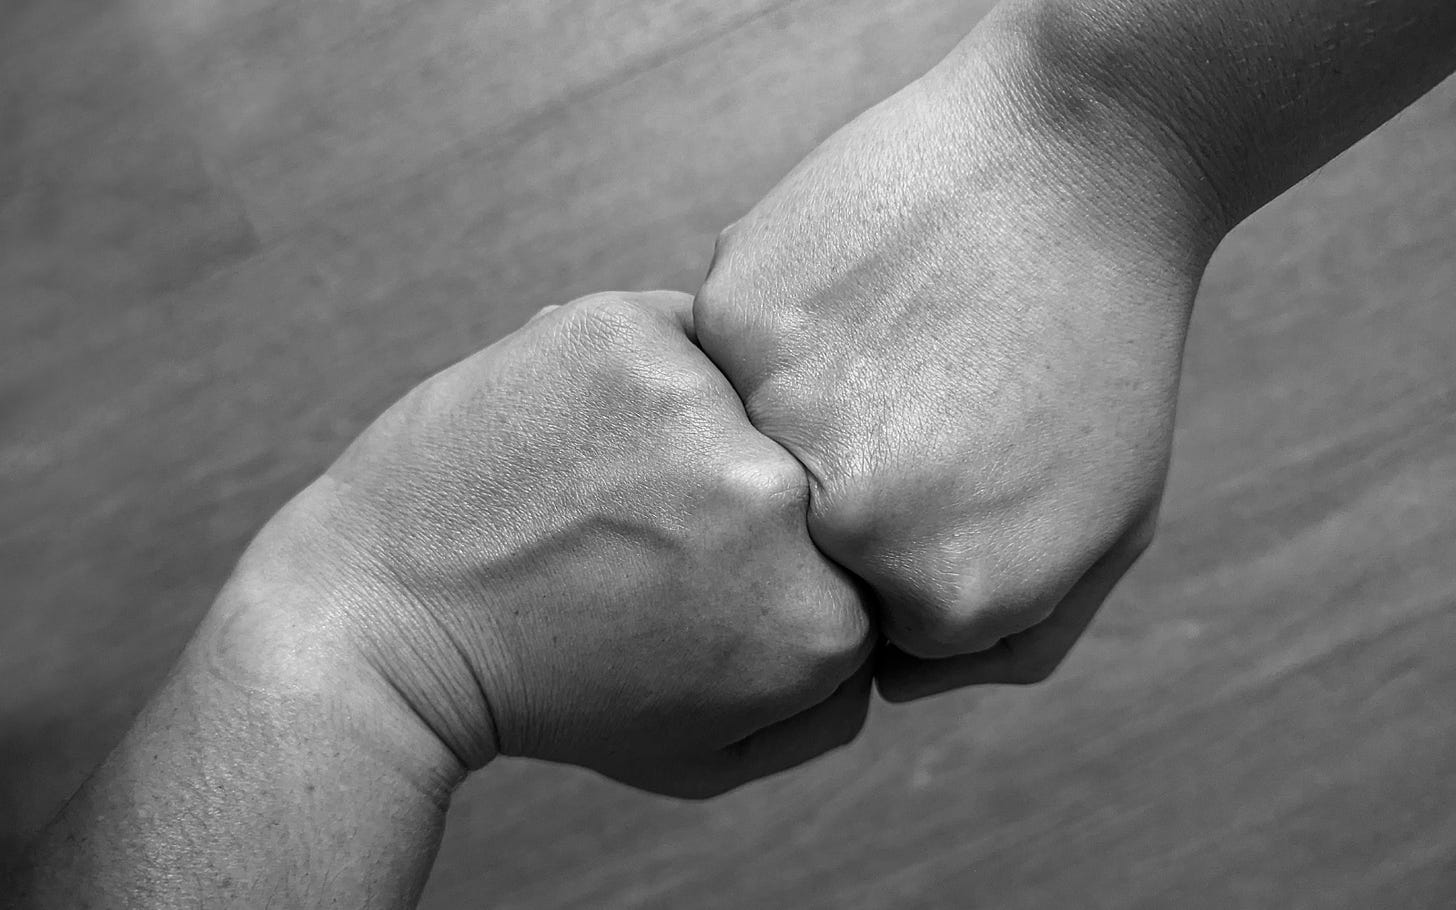 Looking down at two fists in perfect opposition to each other.